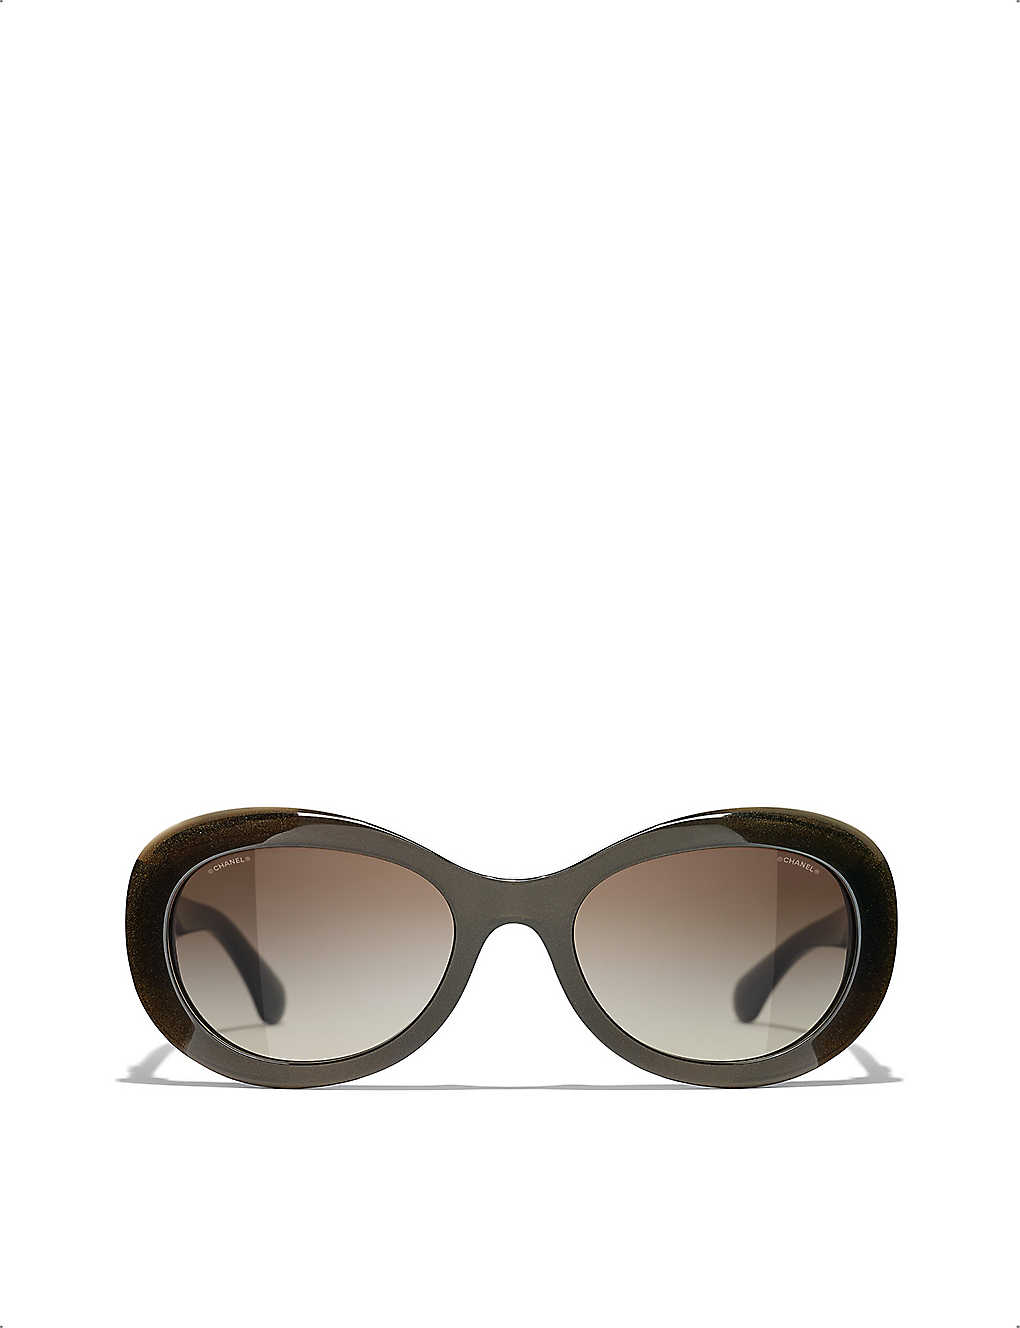 chanel oval sunglasses for women